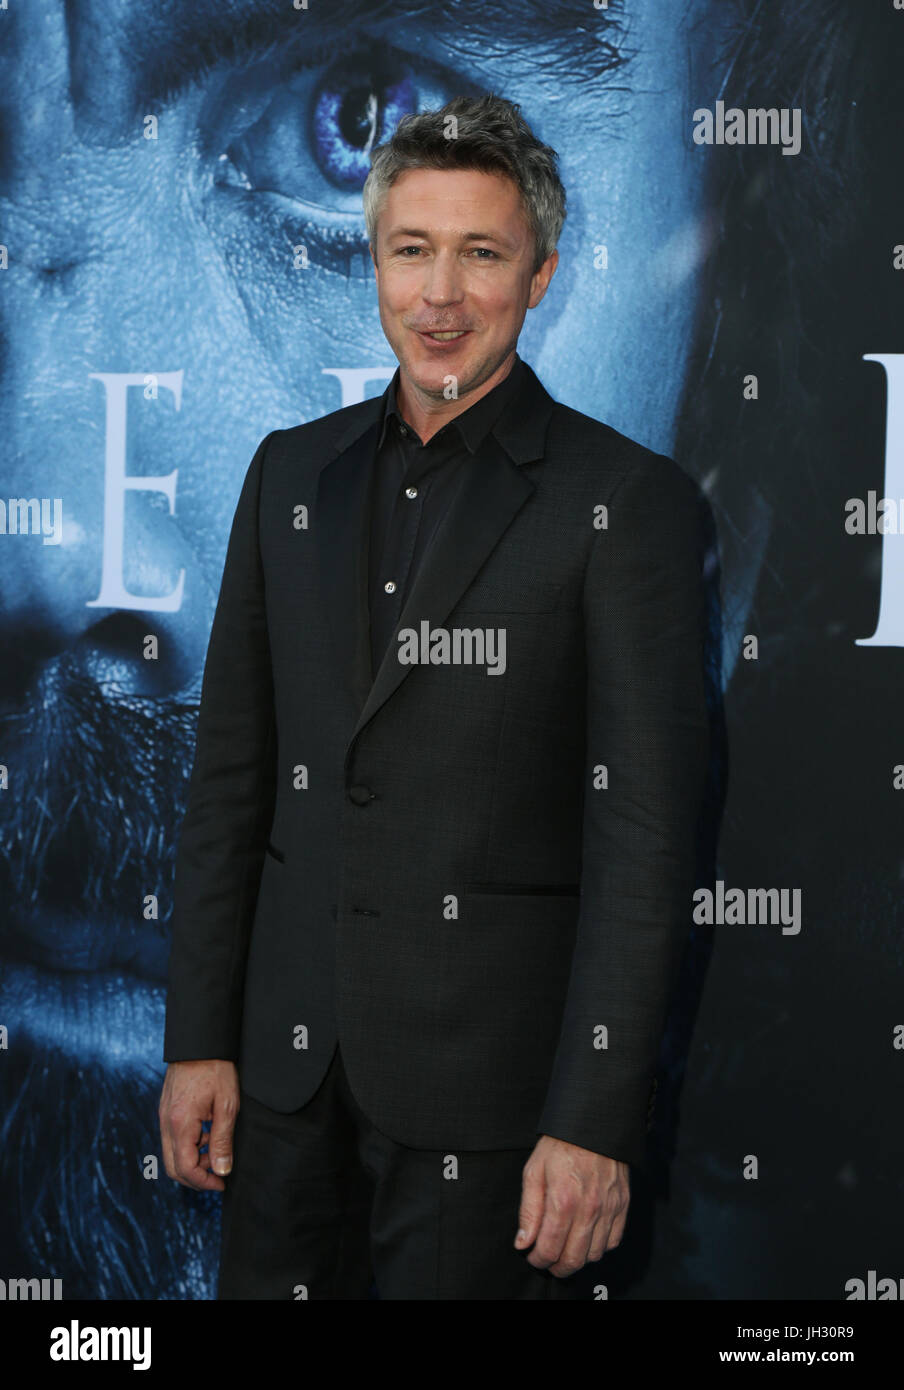 Los Angeles, USA. 12th Jul, 2017. Aiden Gillen, at premiere ofHBO's 'Game Of Thrones' Season 7 at The Walt Disney Concert Hall, California on July 12, 2017. Credit: MediaPunch Inc/Alamy Live News Stock Photo